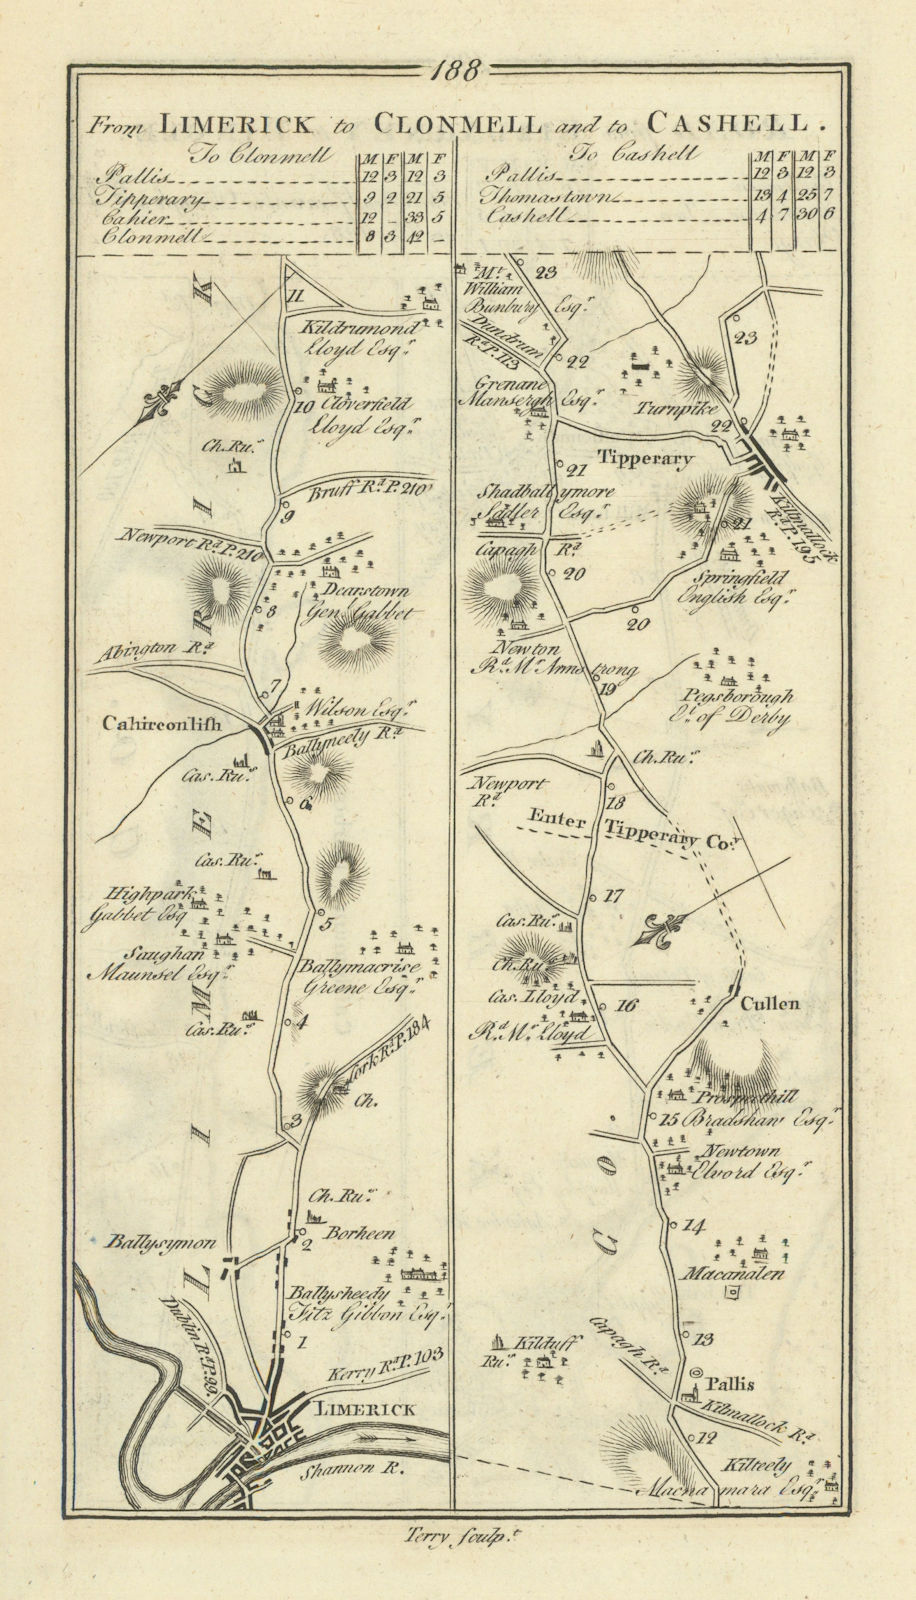 Associate Product #188 Limerick to Clonmell. Tipperary Caherconlish Pallas TAYLOR/SKINNER 1778 map